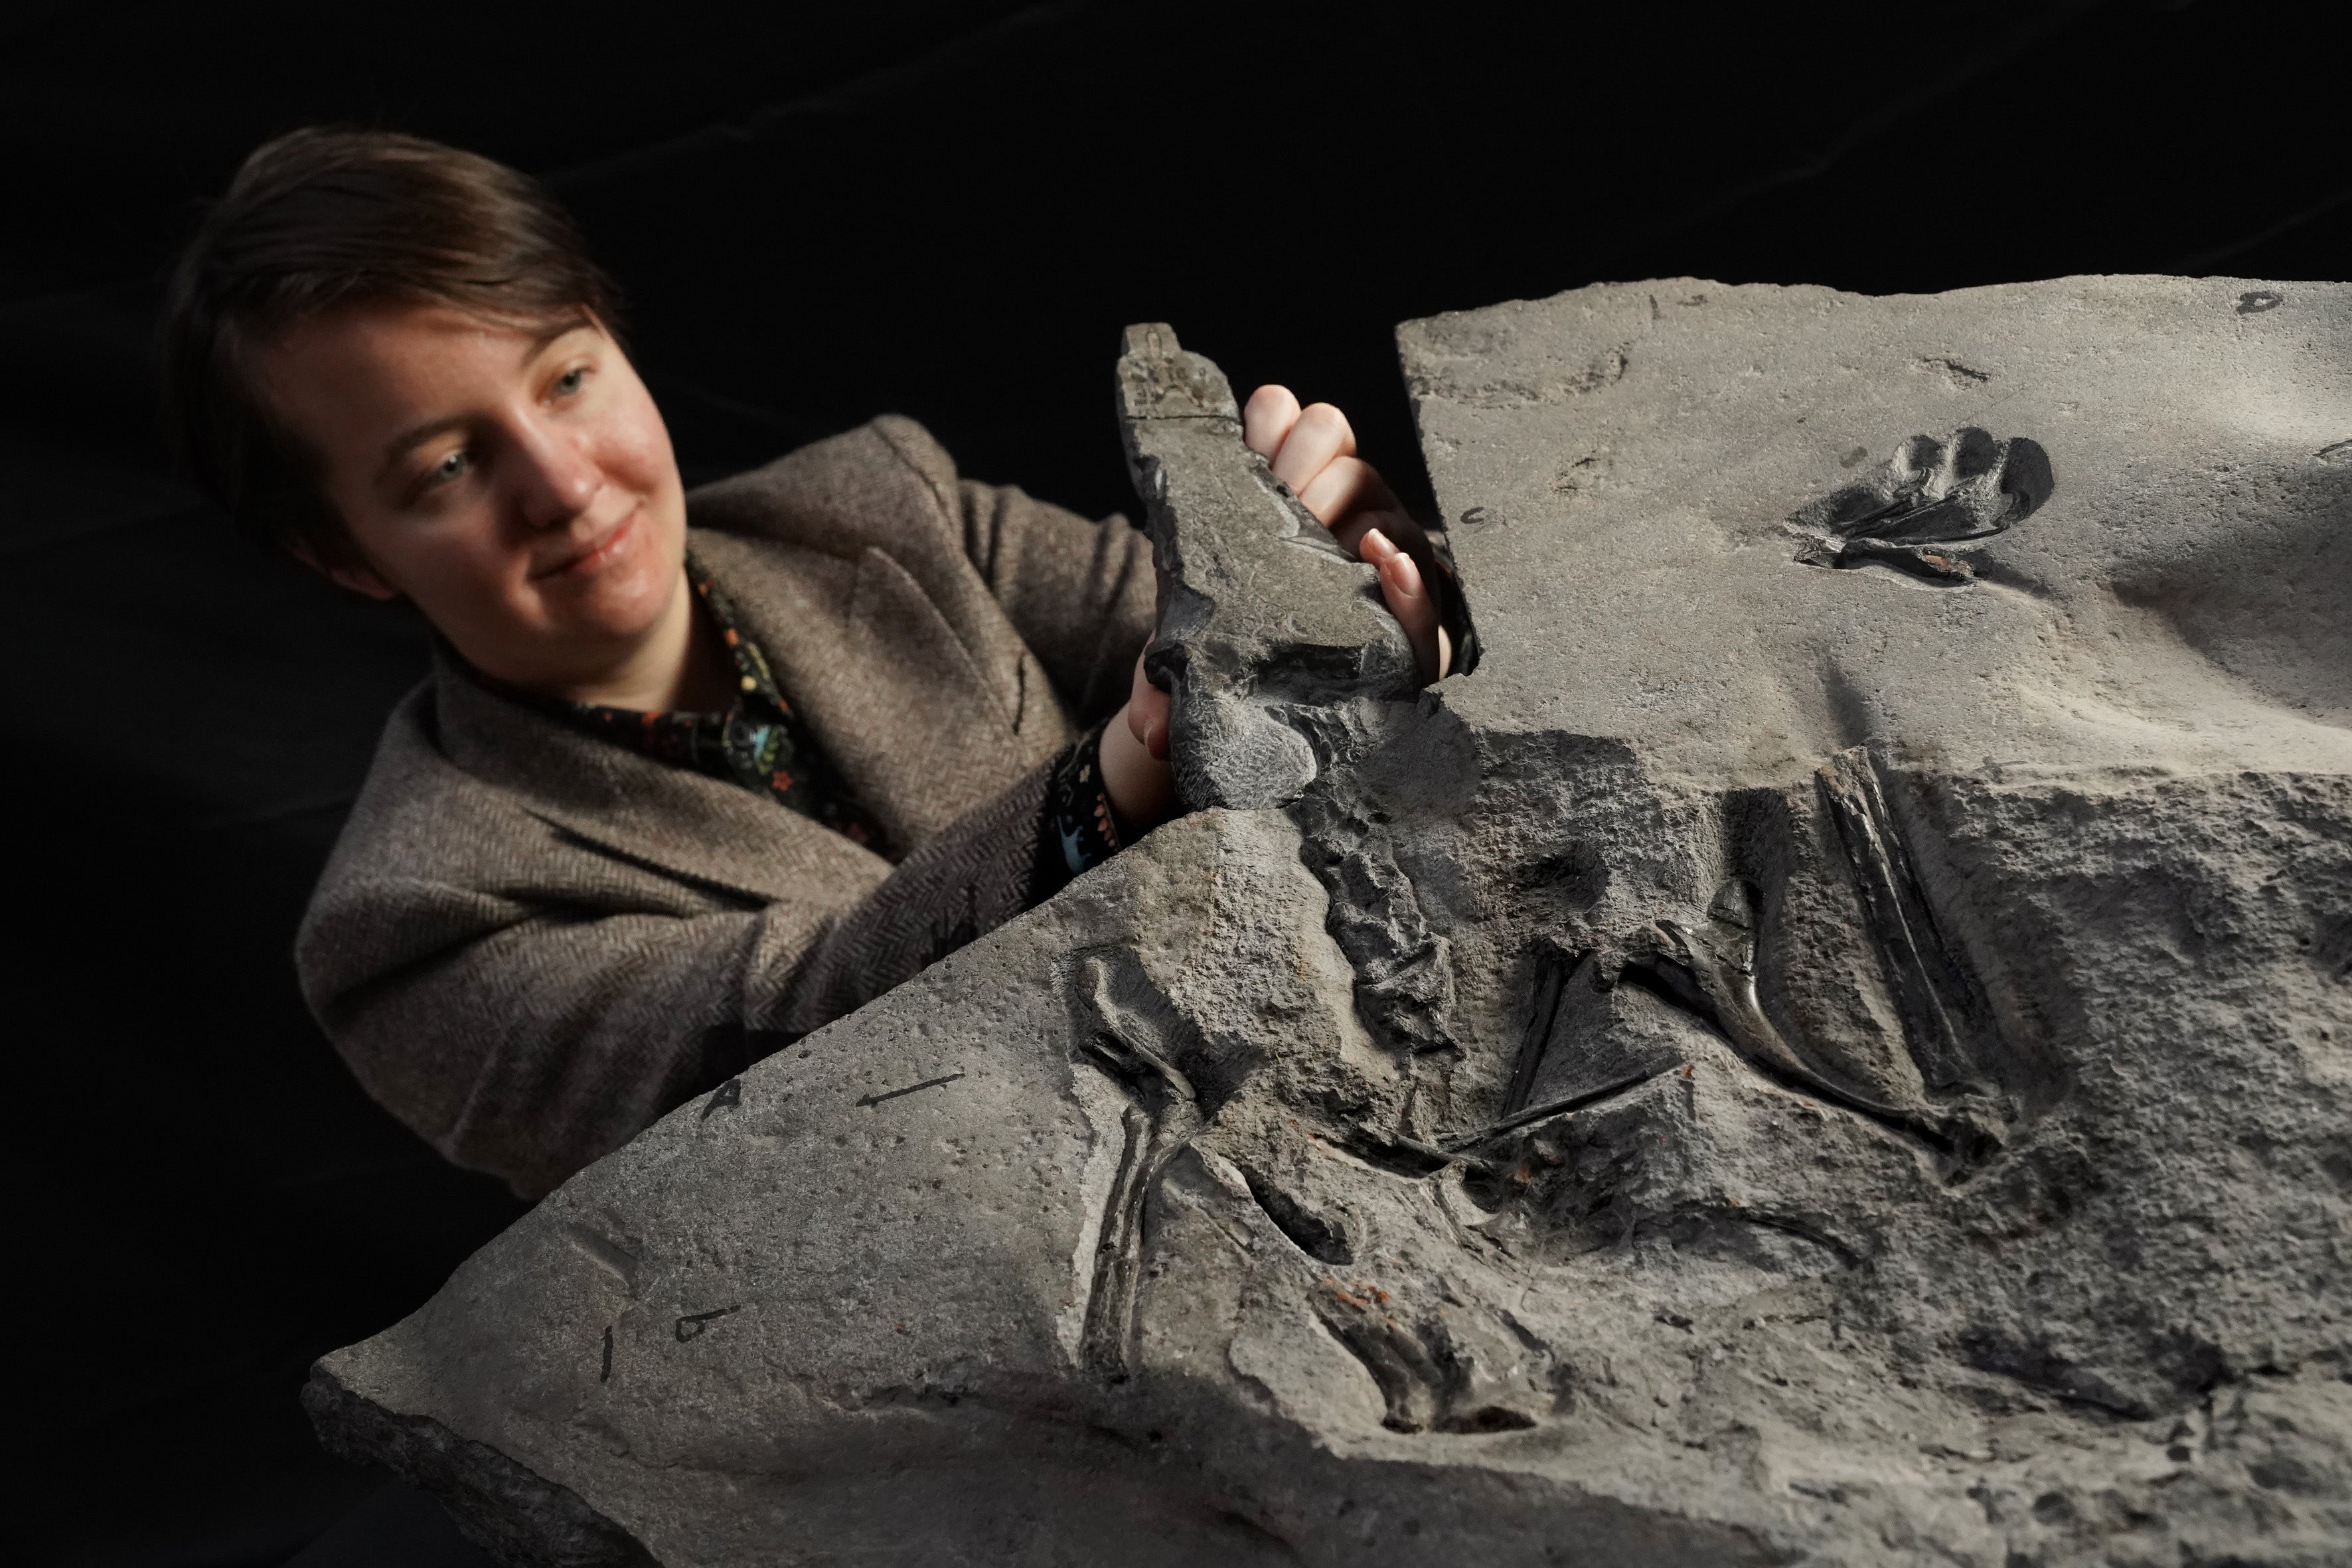 University of Edinburgh PhD student Natalia Jagielska with what has been hailed as the world’s largest Jurassic pterosaur fossil